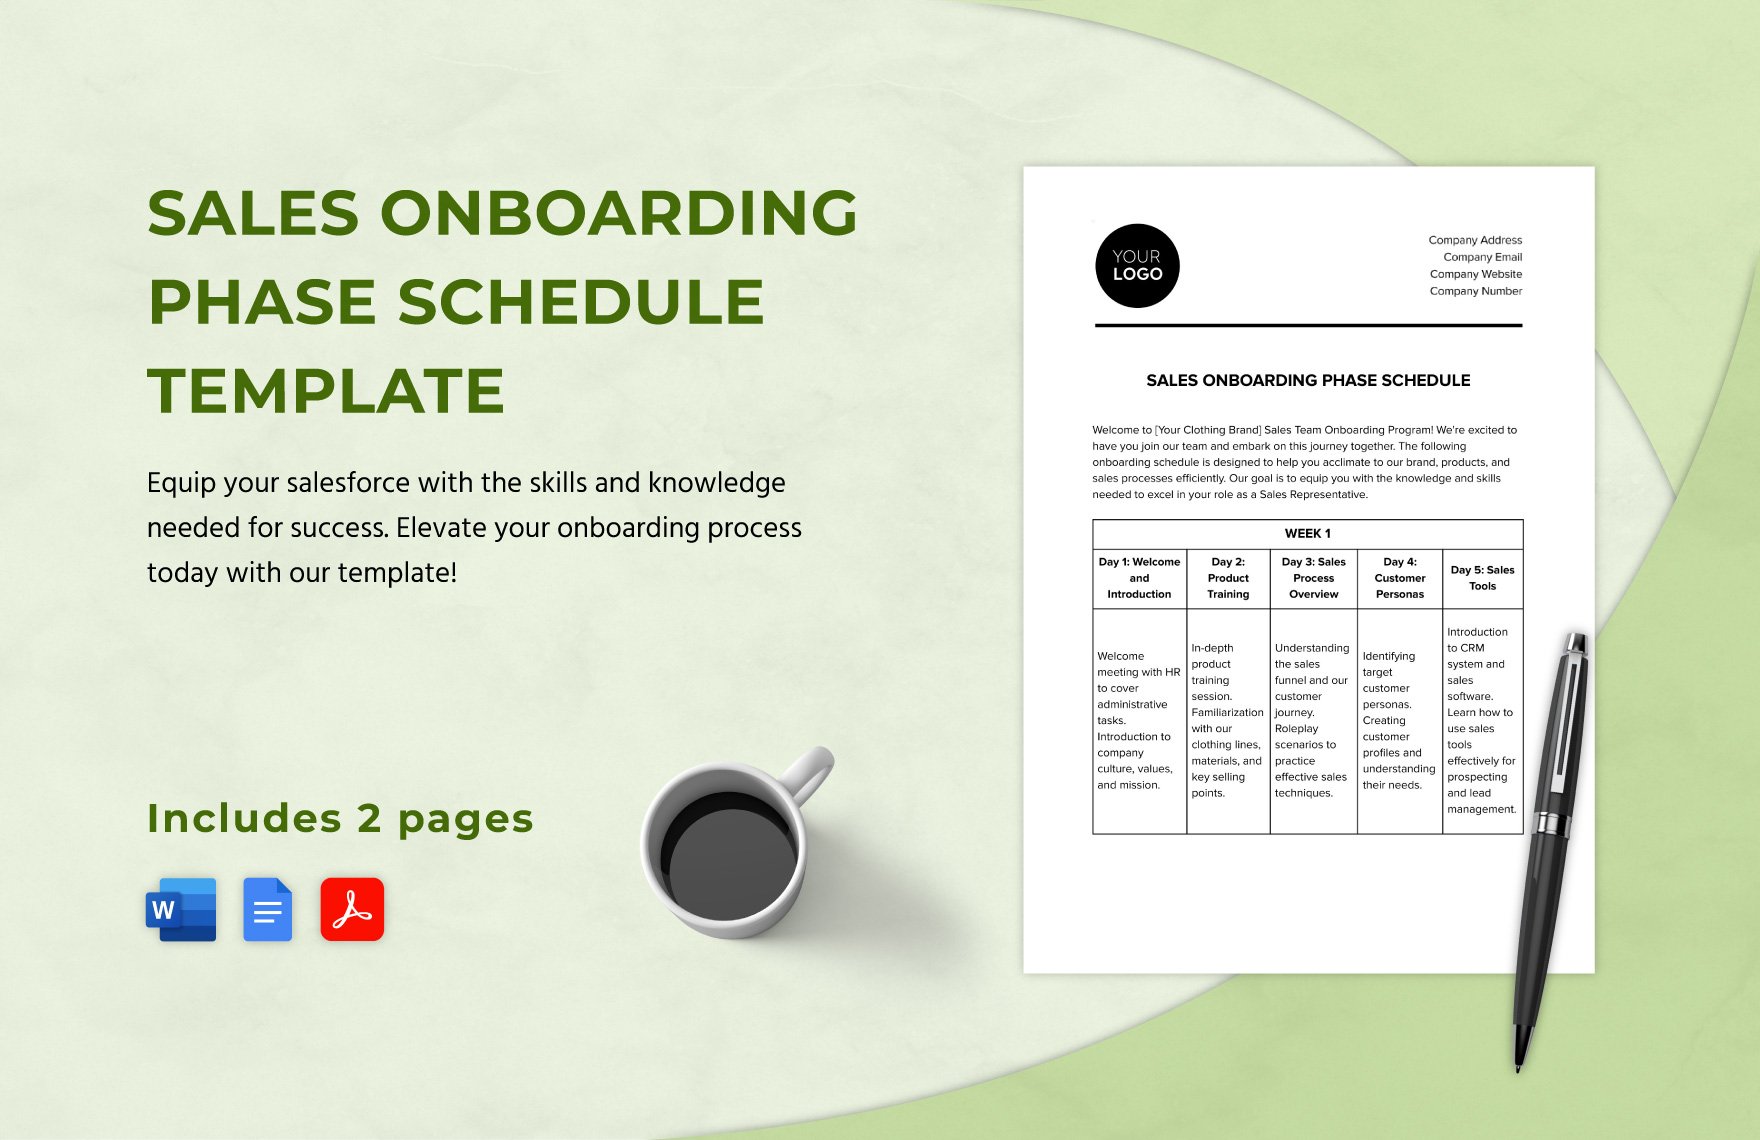 Sales Onboarding Phase Schedule Template in Word, Google Docs, PDF